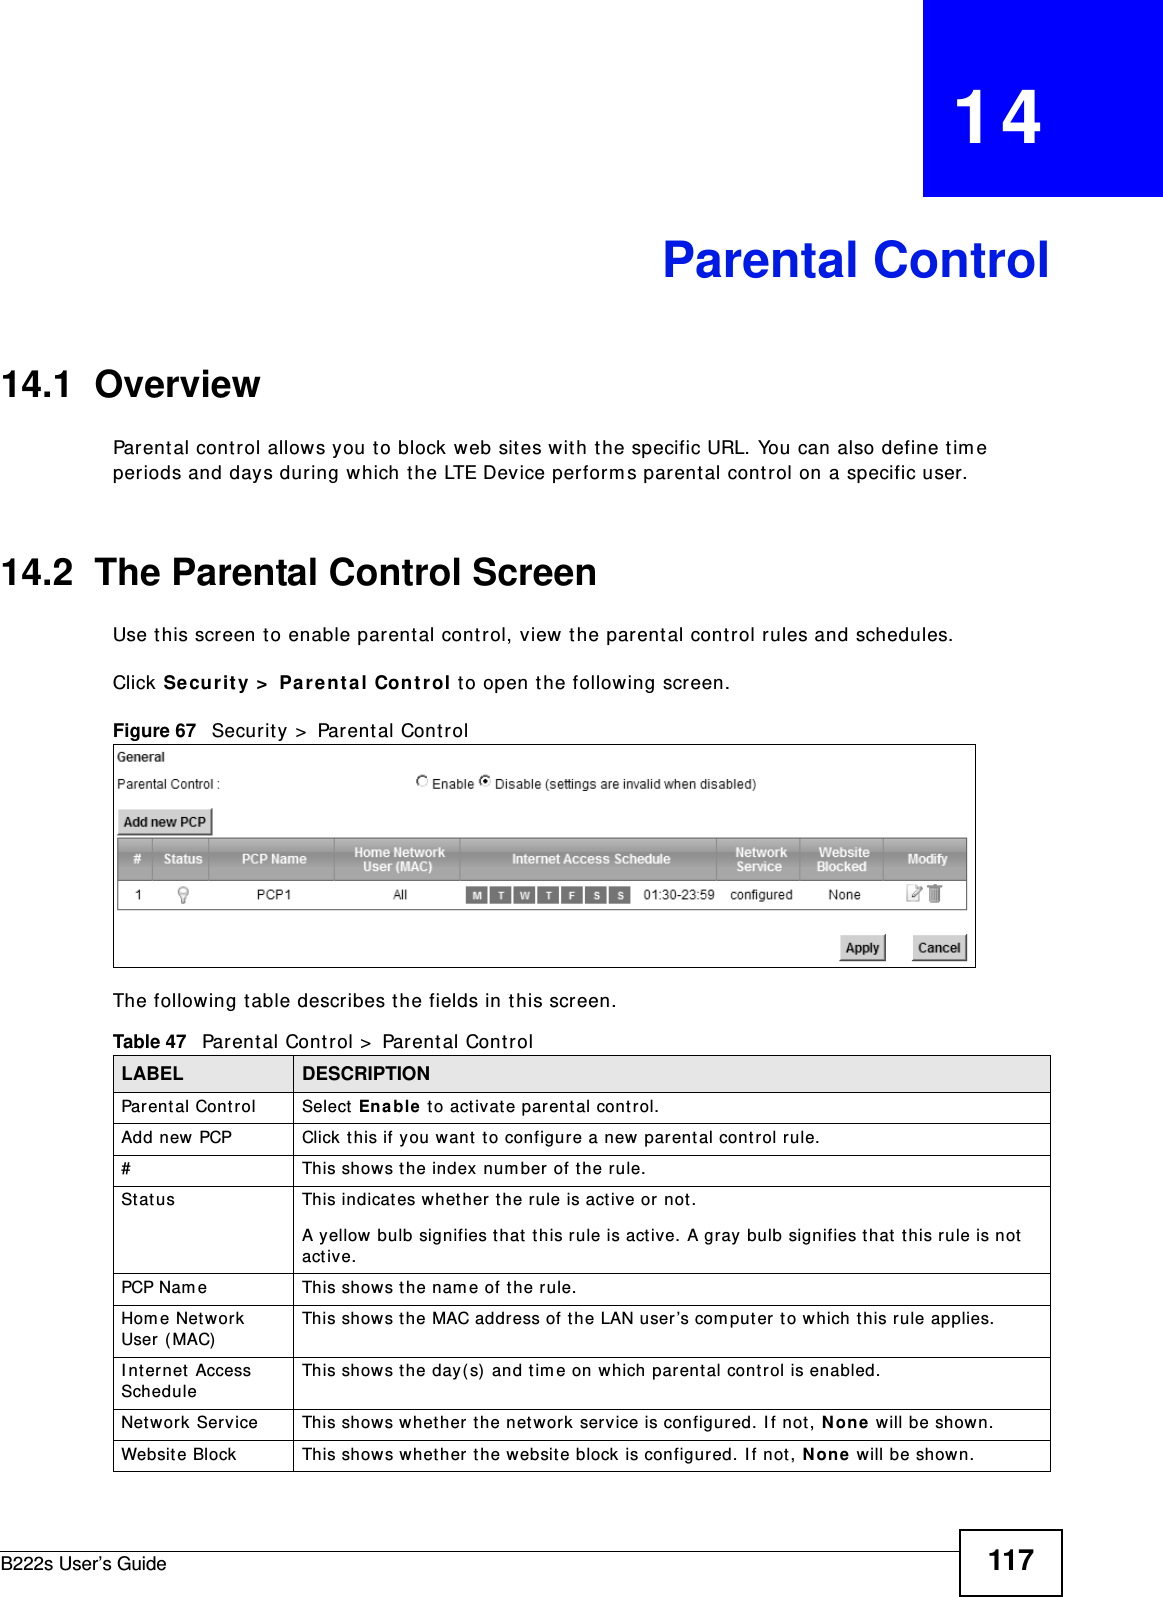 B222s User’s Guide 117CHAPTER   14Parental Control14.1  OverviewParent al cont rol allows you to block web sites wit h t he specific URL. You can also define t im e periods and days during w hich t he LTE Device perform s parent al cont rol on a specific user. 14.2  The Parental Control ScreenUse t his screen to enable parent al cont rol, view t he parent al cont rol rules and schedules.Click Secur it y &gt;  Pa r e nt a l Con t rol t o open t he following screen. Figure 67   Securit y &gt;  Parental Control The following t able describes t he fields in t his screen. Table 47   Parent al Control &gt;  Parent al Cont rolLABEL DESCRIPTIONParent al Control Select En able  t o activate parental cont rol.Add new PCP Click t his if you want  to configure a new  parent al cont r ol rule.#This shows t he index num ber of the r ule.St atus This indicat es whether t he rule is active or  not .A yellow bulb signifies t hat t his rule is act ive. A gray bulb signifies t hat  t his r ule is not  act ive.PCP Nam e This show s t he nam e of t he rule.Hom e Net work User ( MAC)This shows t he MAC address of t he LAN user’s com put er t o which t his rule applies.I nt ernet Access ScheduleThis shows t he day( s) and t im e on which parent al control is enabled.Net work Service This shows whether t he networ k ser vice is configured. I f not , N o ne  will be shown.Web sit e Block This shows whet her t he websit e block is configured. I f not , N on e  w ill be shown.